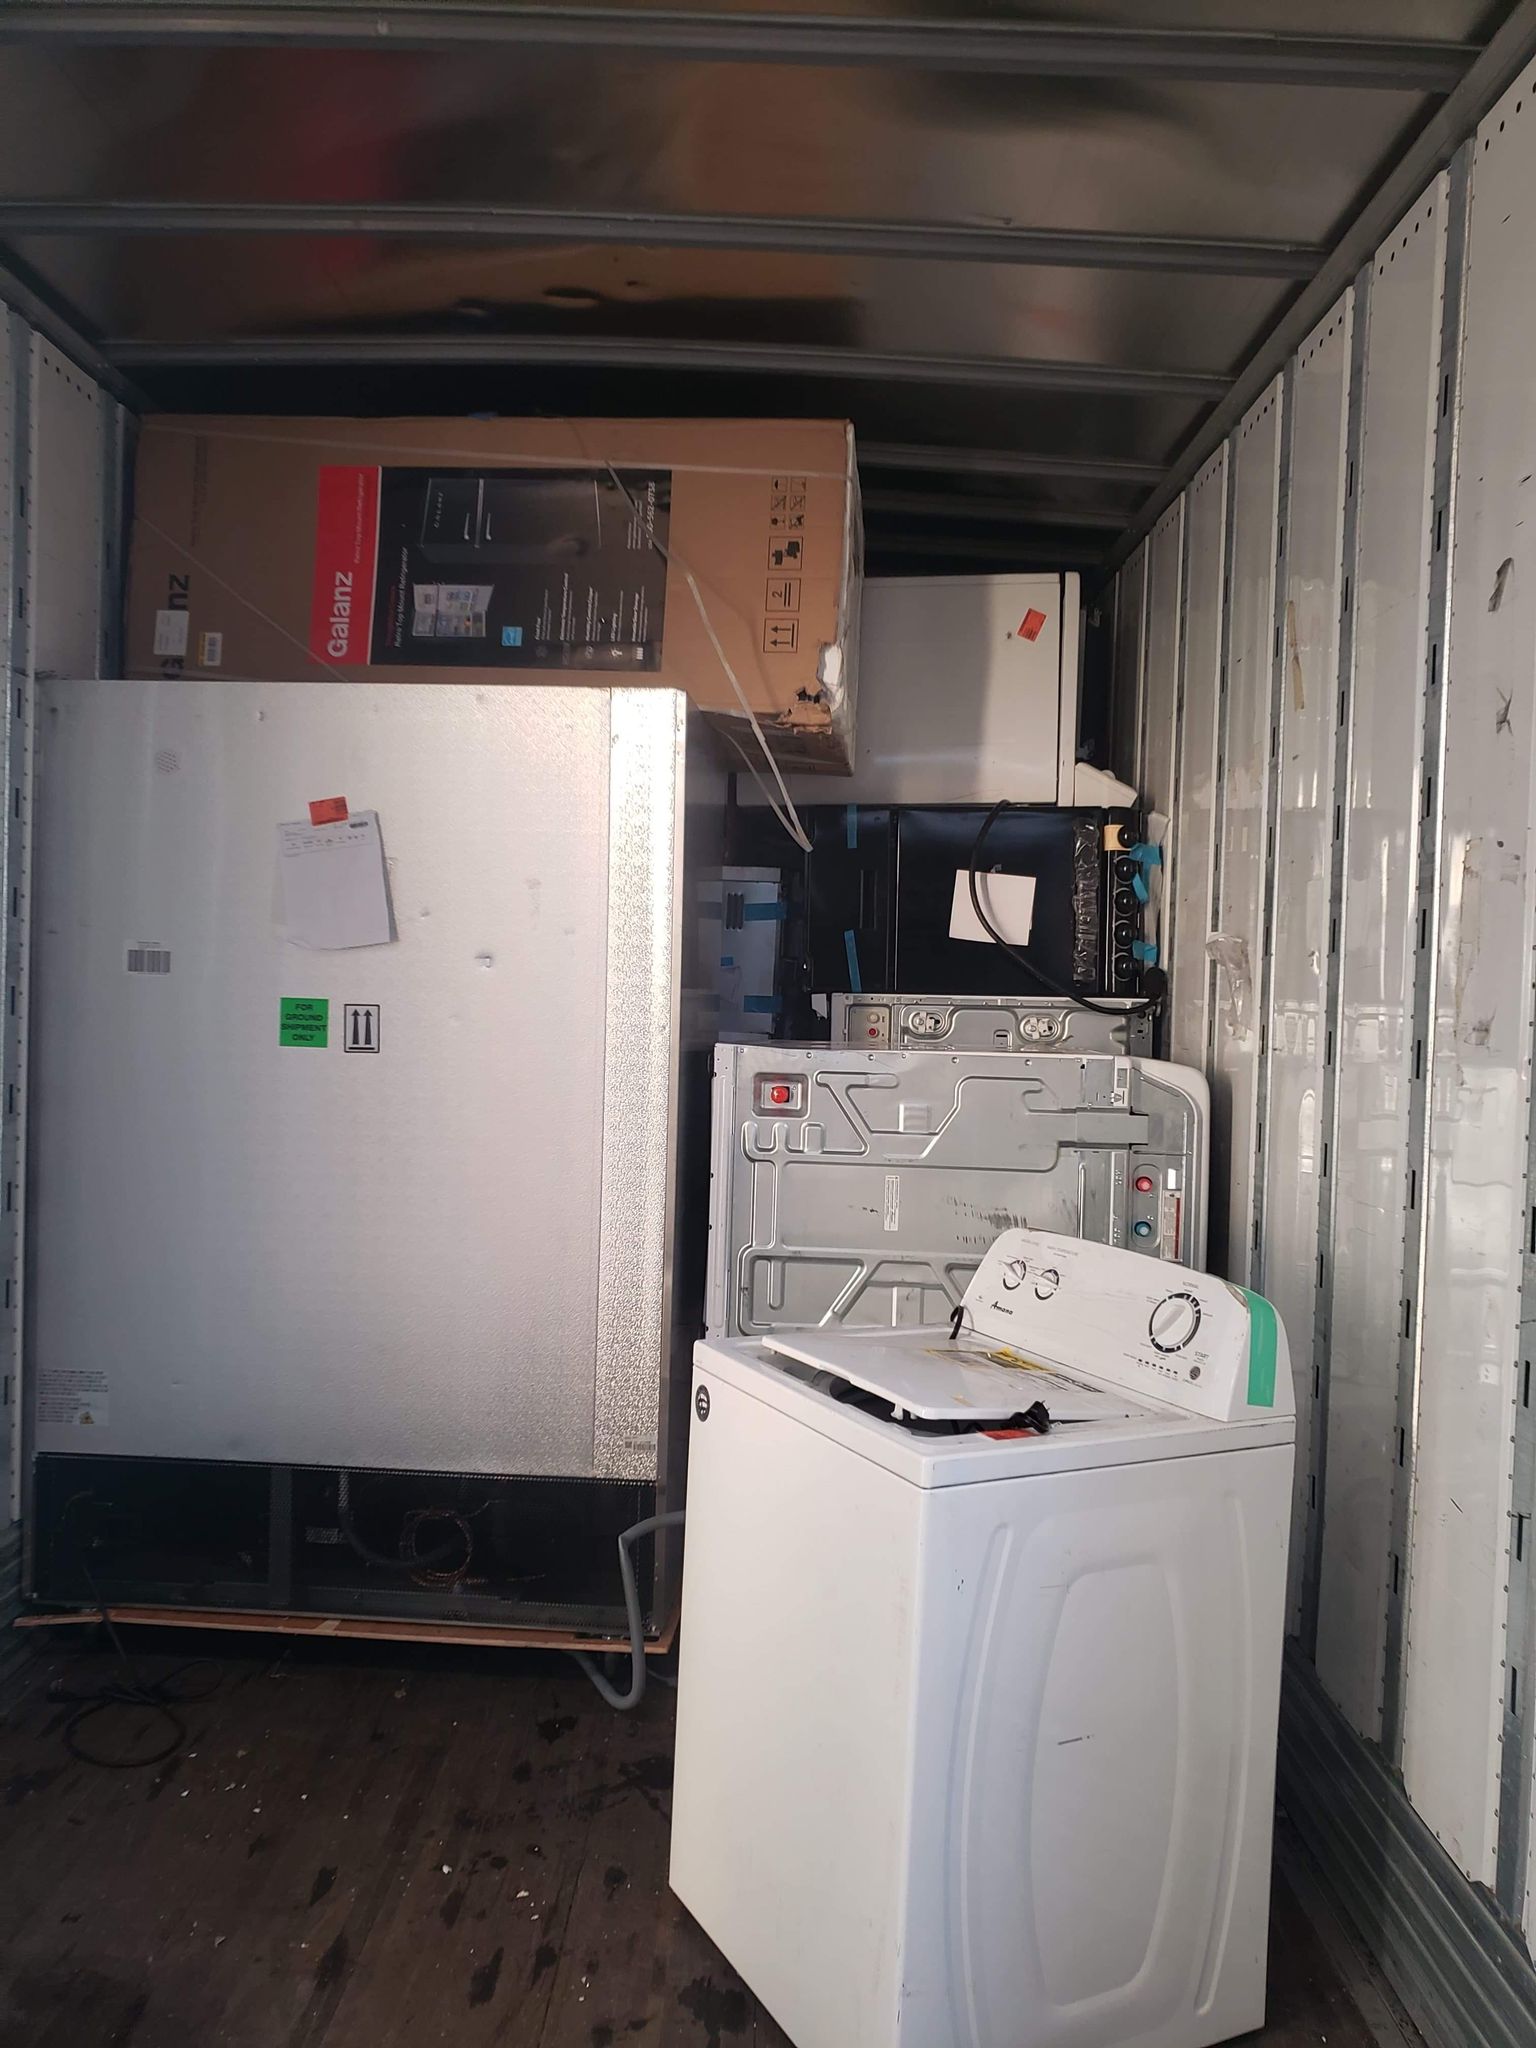 pictured is an Example of types of appliances found from this appliance liquidation truckload program.